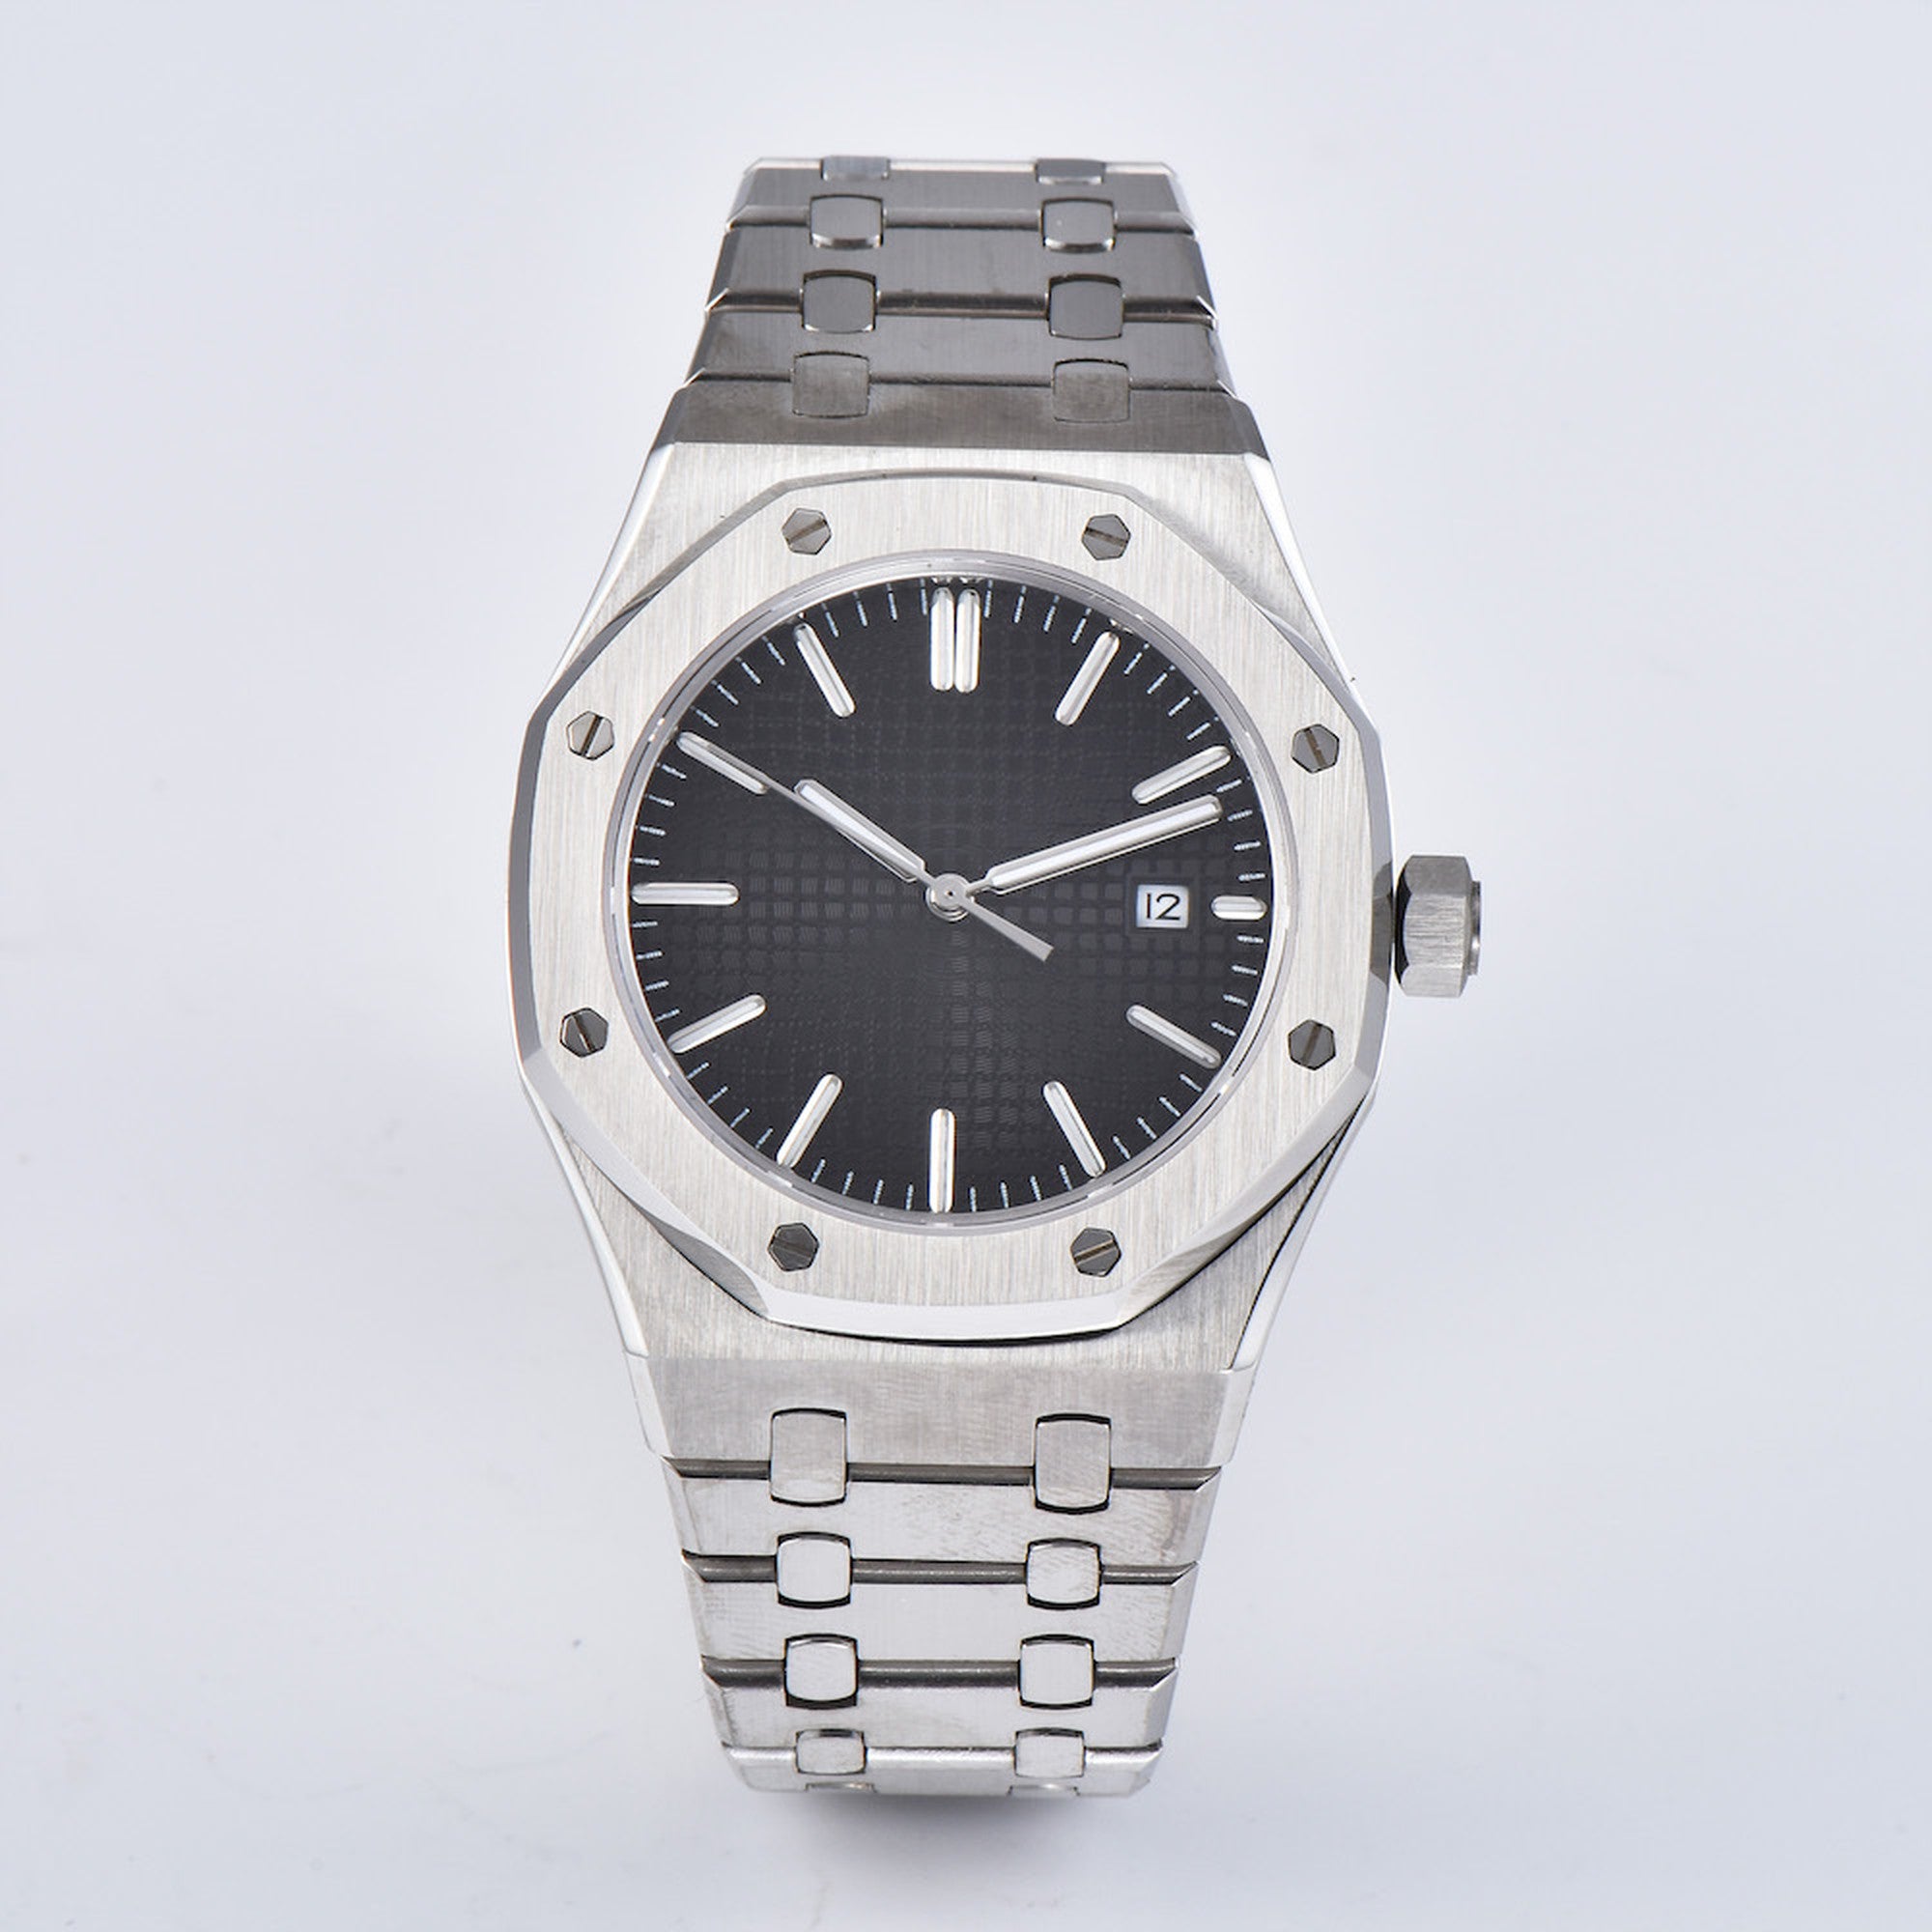 Mechanical Men's Automatic: Stainless Steel Watch Black / Silver / Suit, Popular Luxury Brand / Fashion AP75